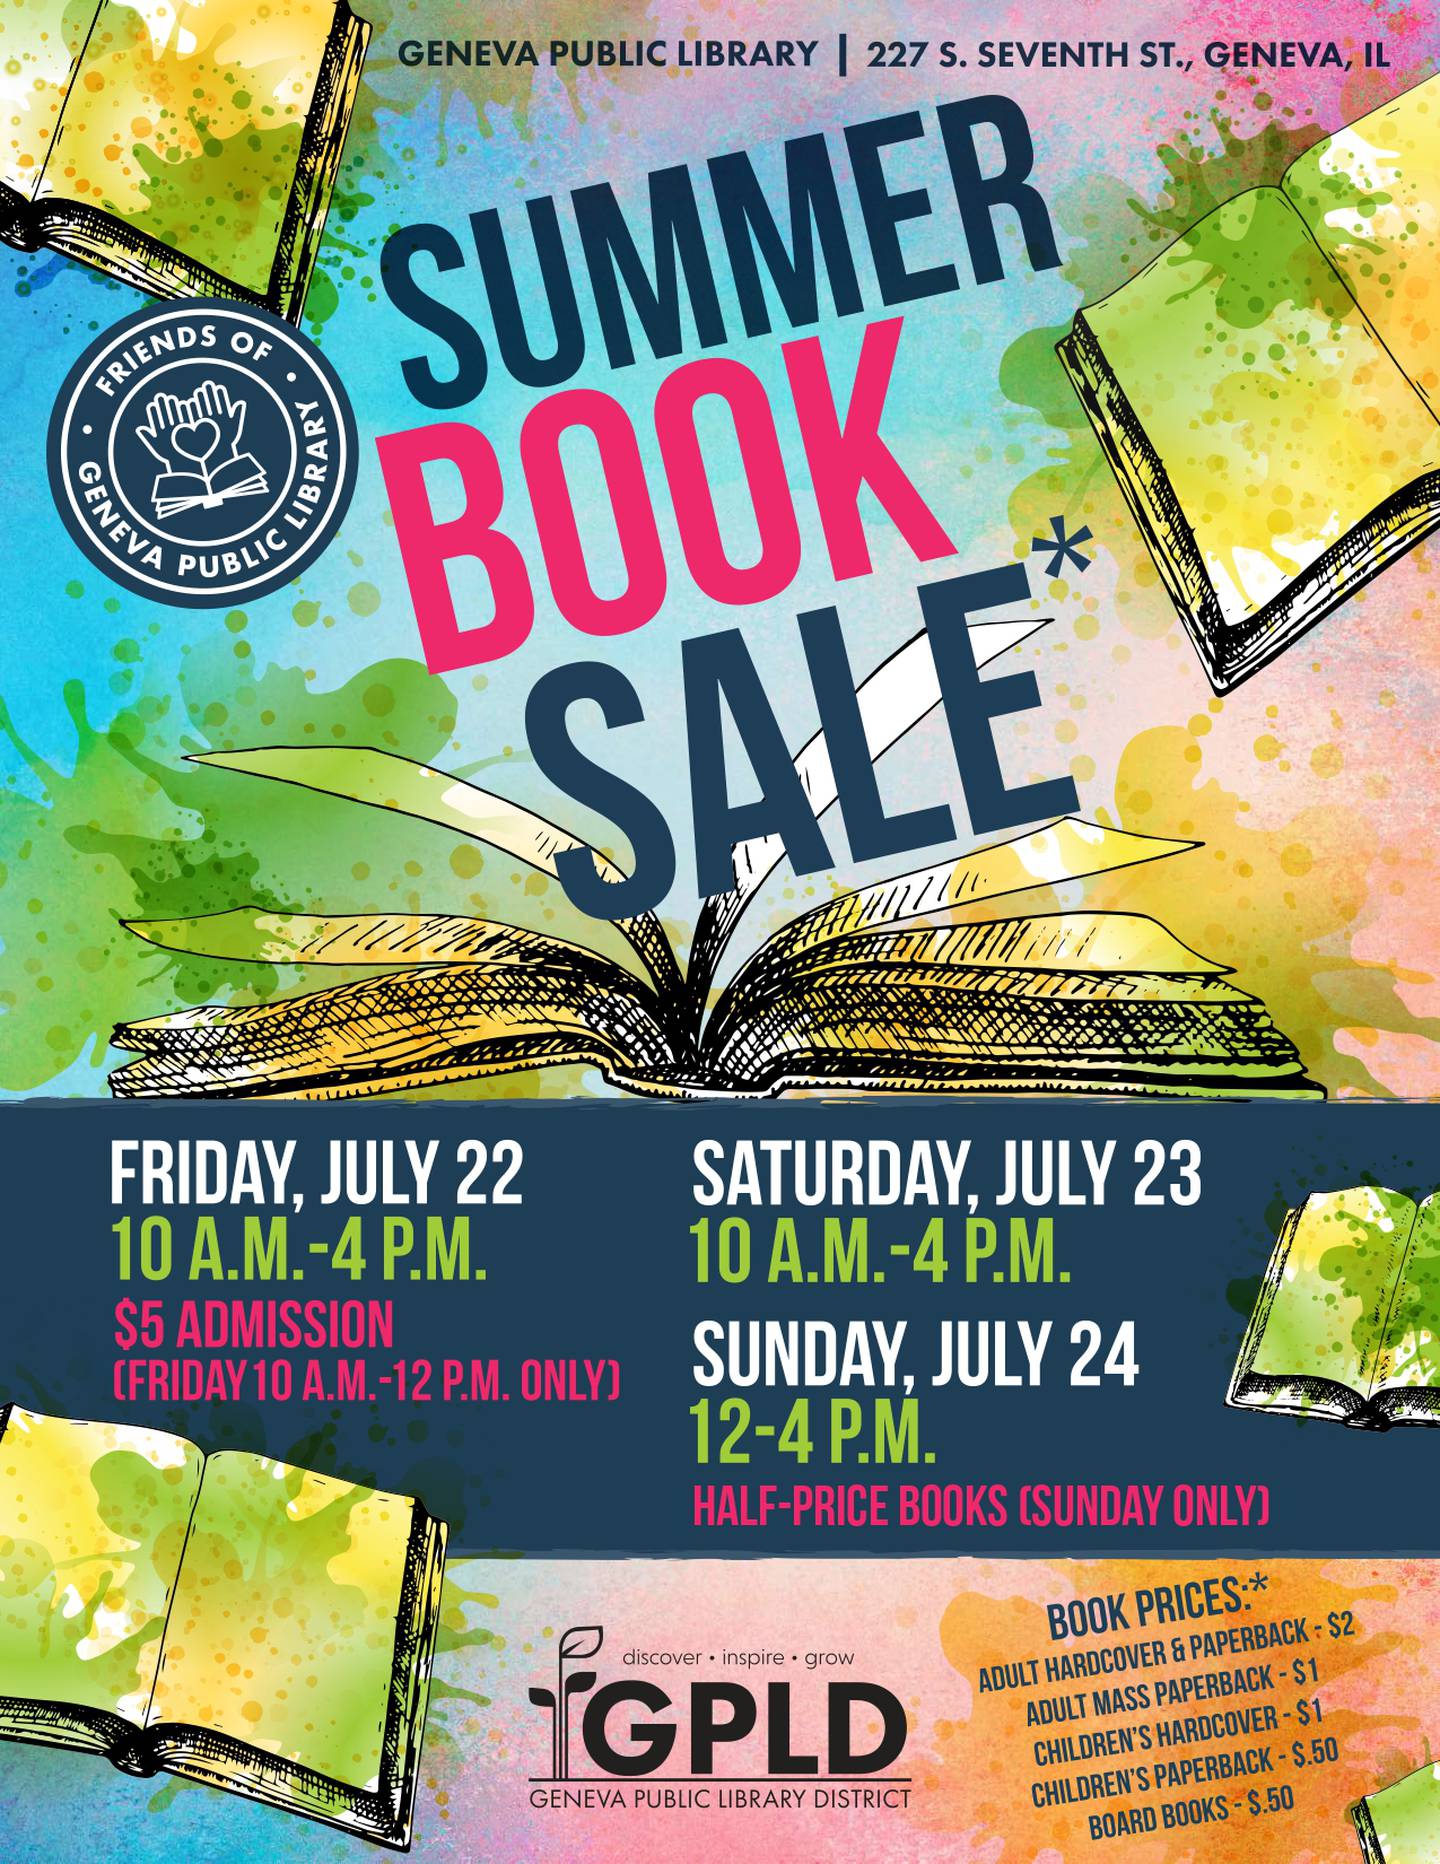 Thousands of gently-used books will be available for purchase at the Friends of Geneva Public Library’s used book sale from Friday, July 22, 2022 to Sunday, July 24, 2022.